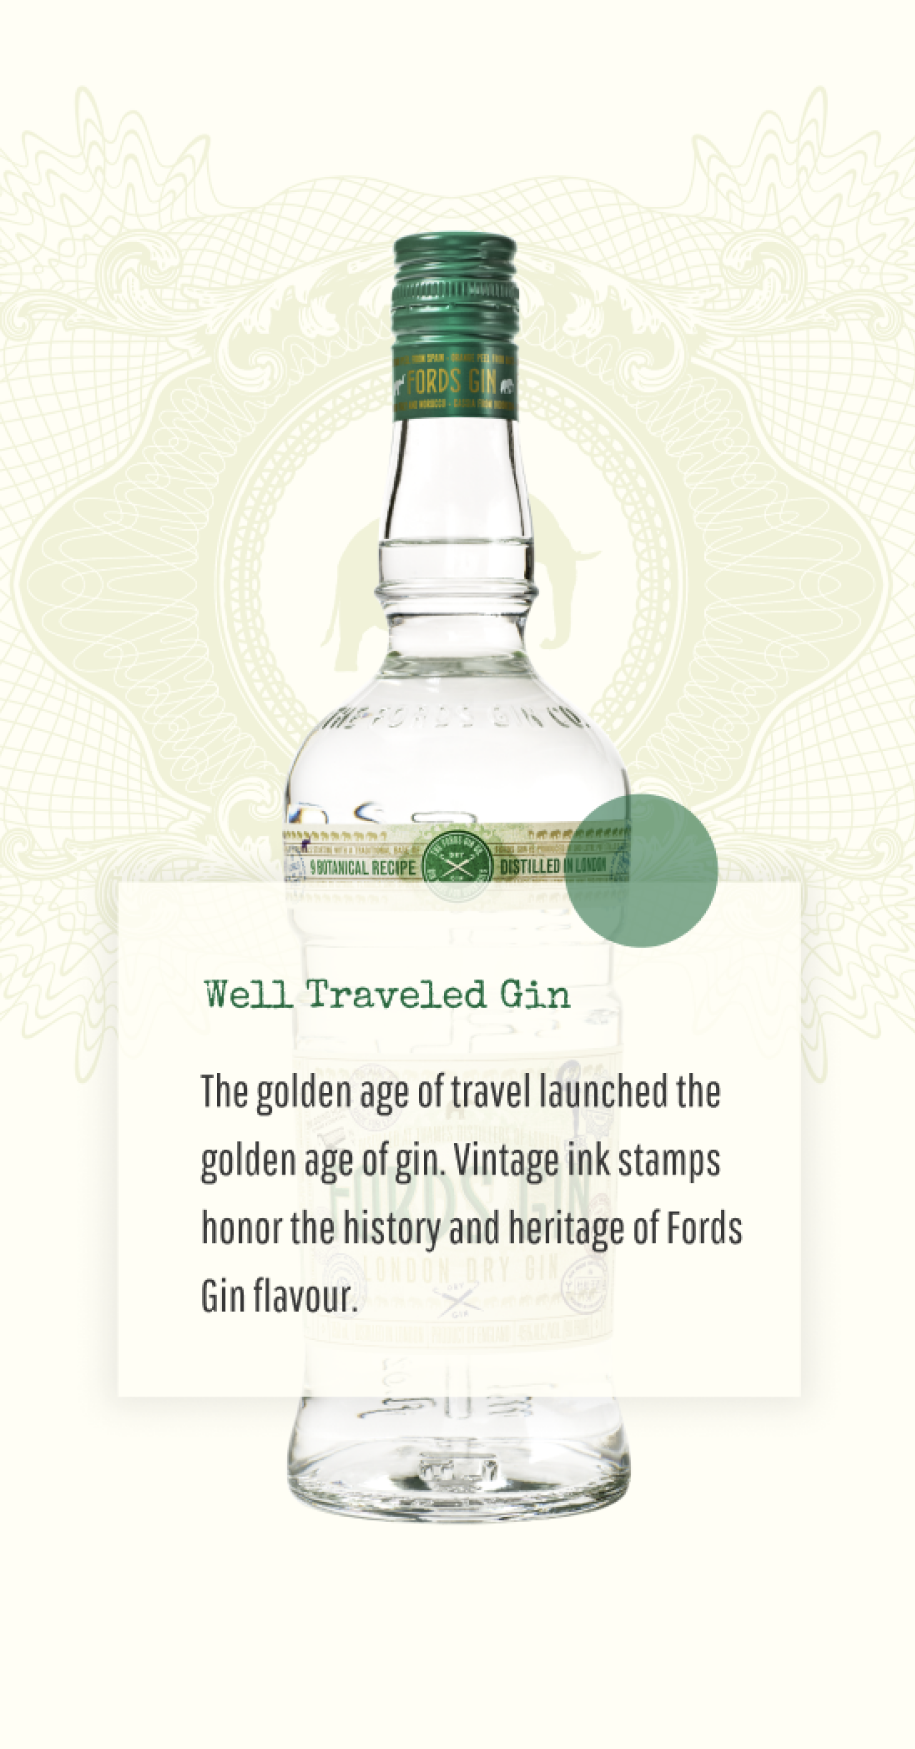 Mobile screengrab showing a bottle and headline 'Well Traveled Gin' on the Fords Gin website